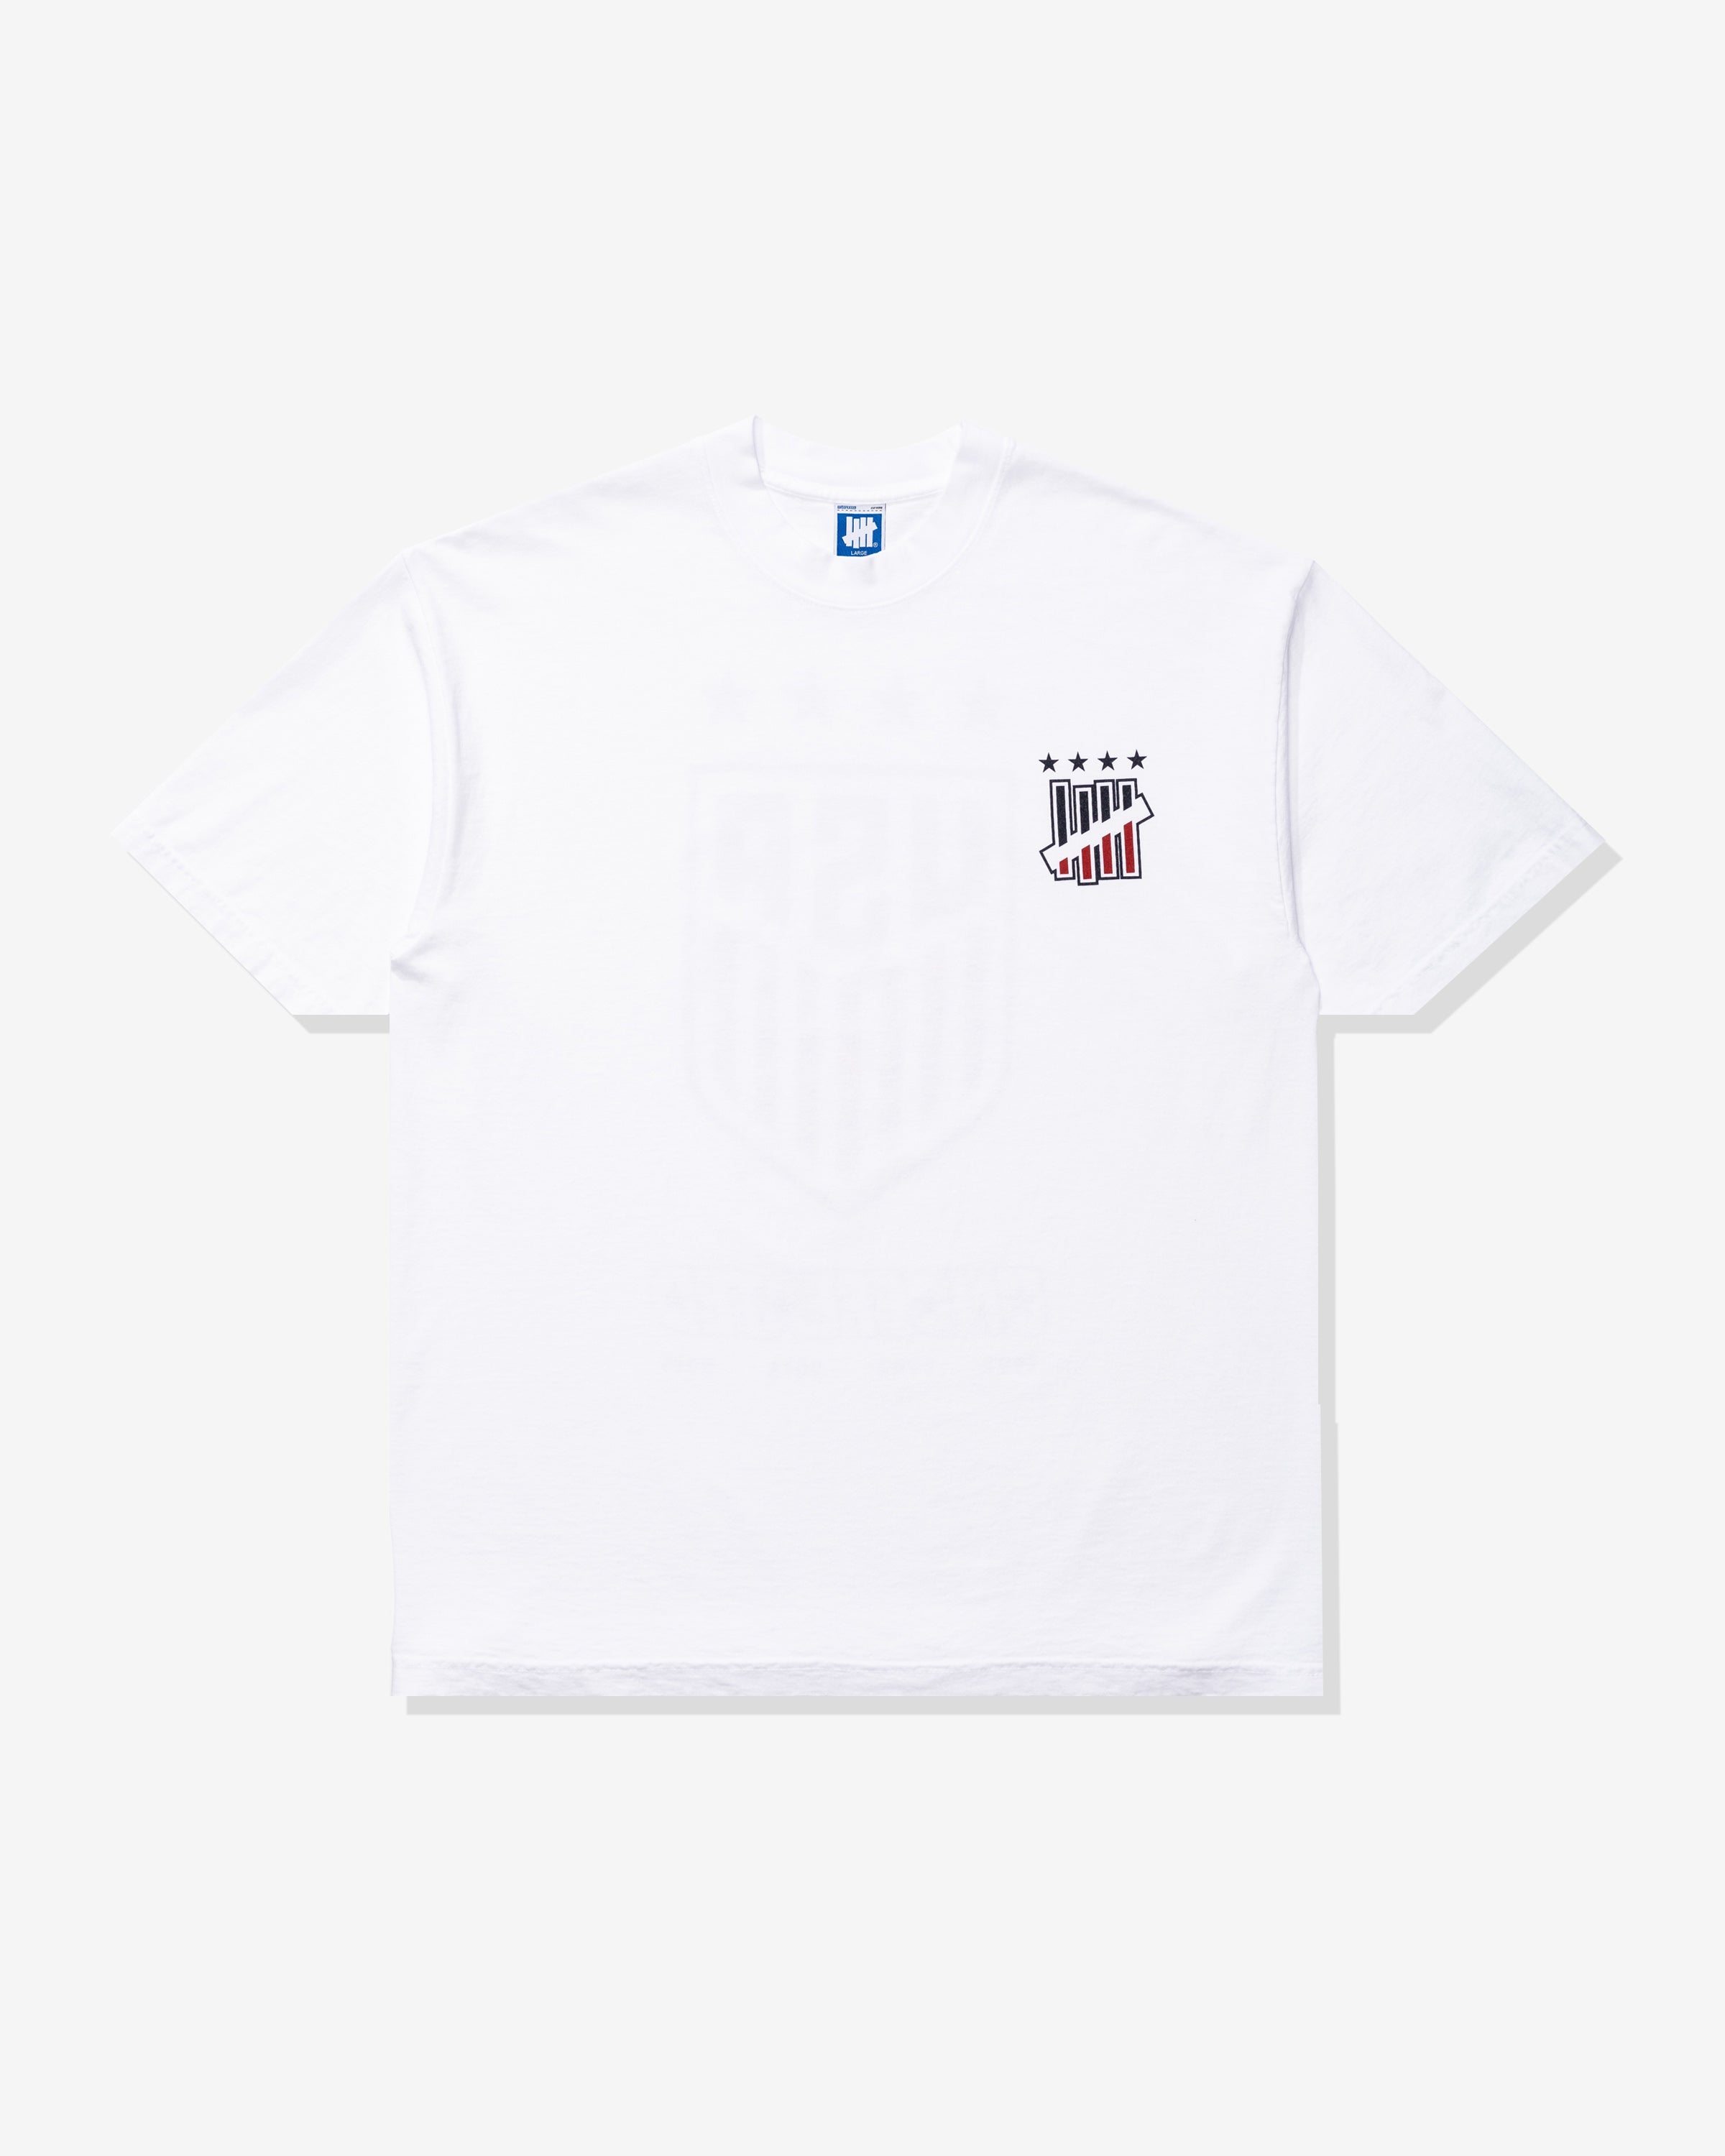 UNDEFEATED X USWNT S/S TEE - WHITE